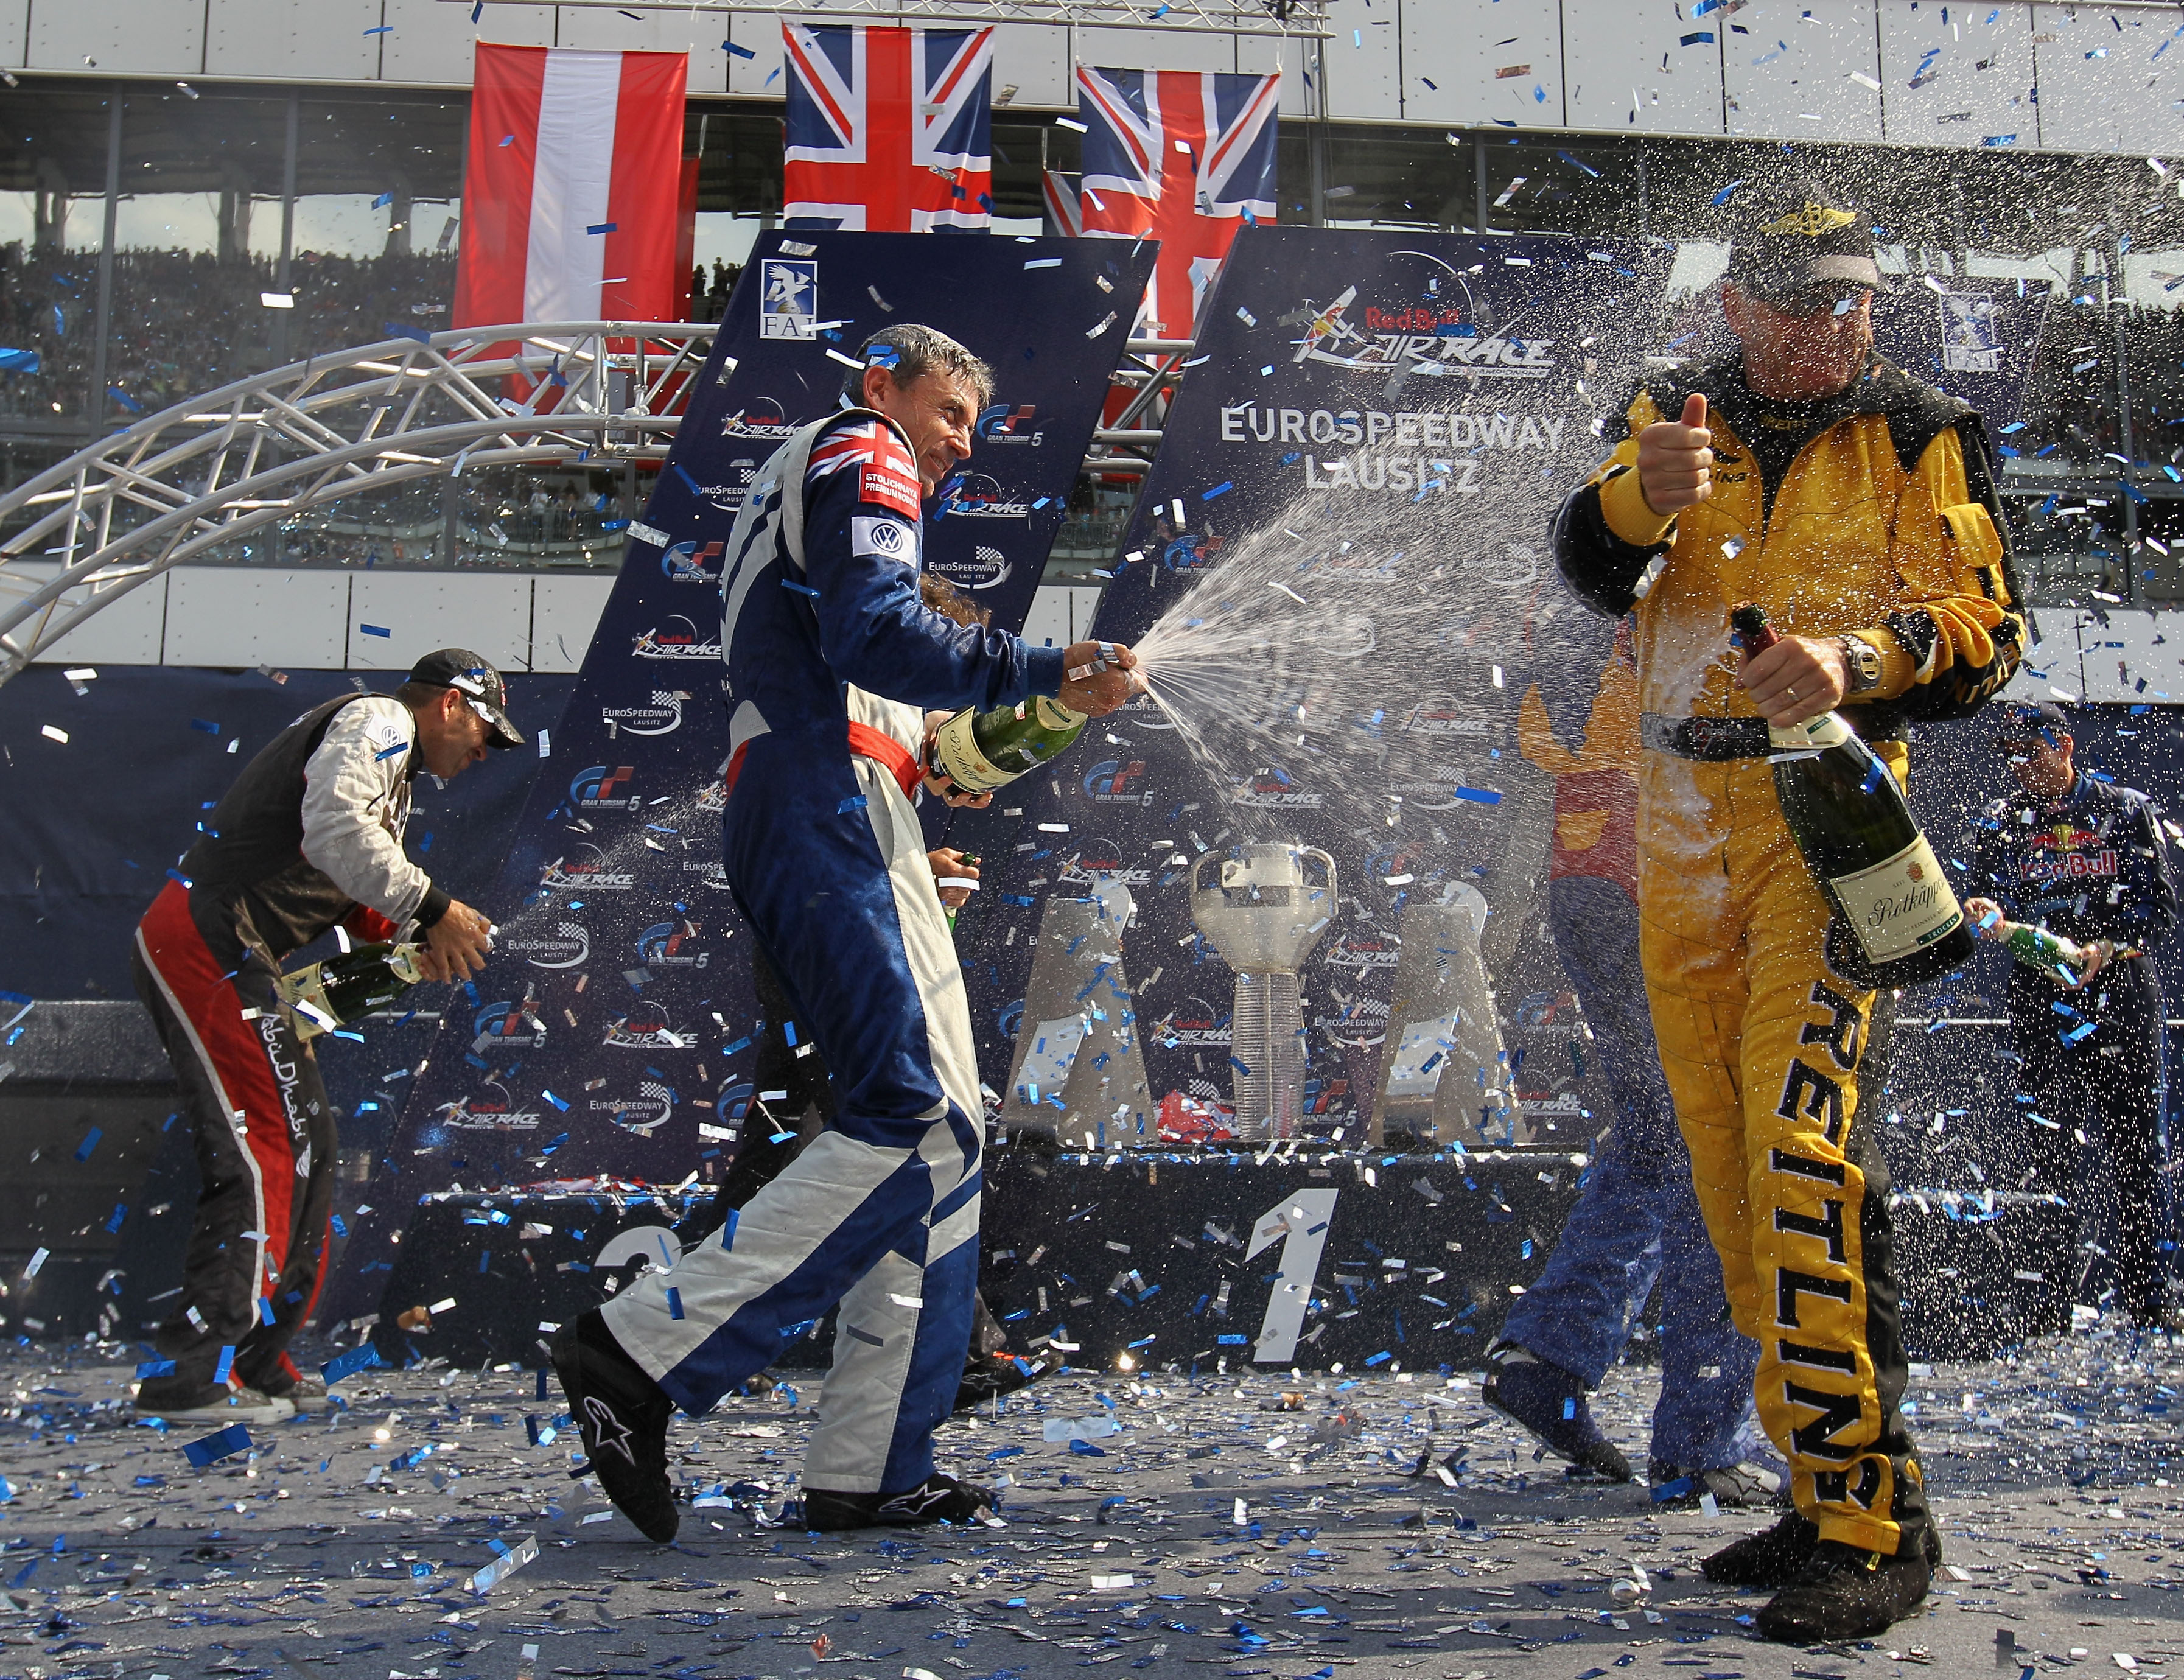 Aeroplans - Paul Bonhomme of Great Britain celebrates winning the Red Bull Air Race World Championship at the Eurospeedway © Hamish Blair / Getty Images for Red Bull Air Race